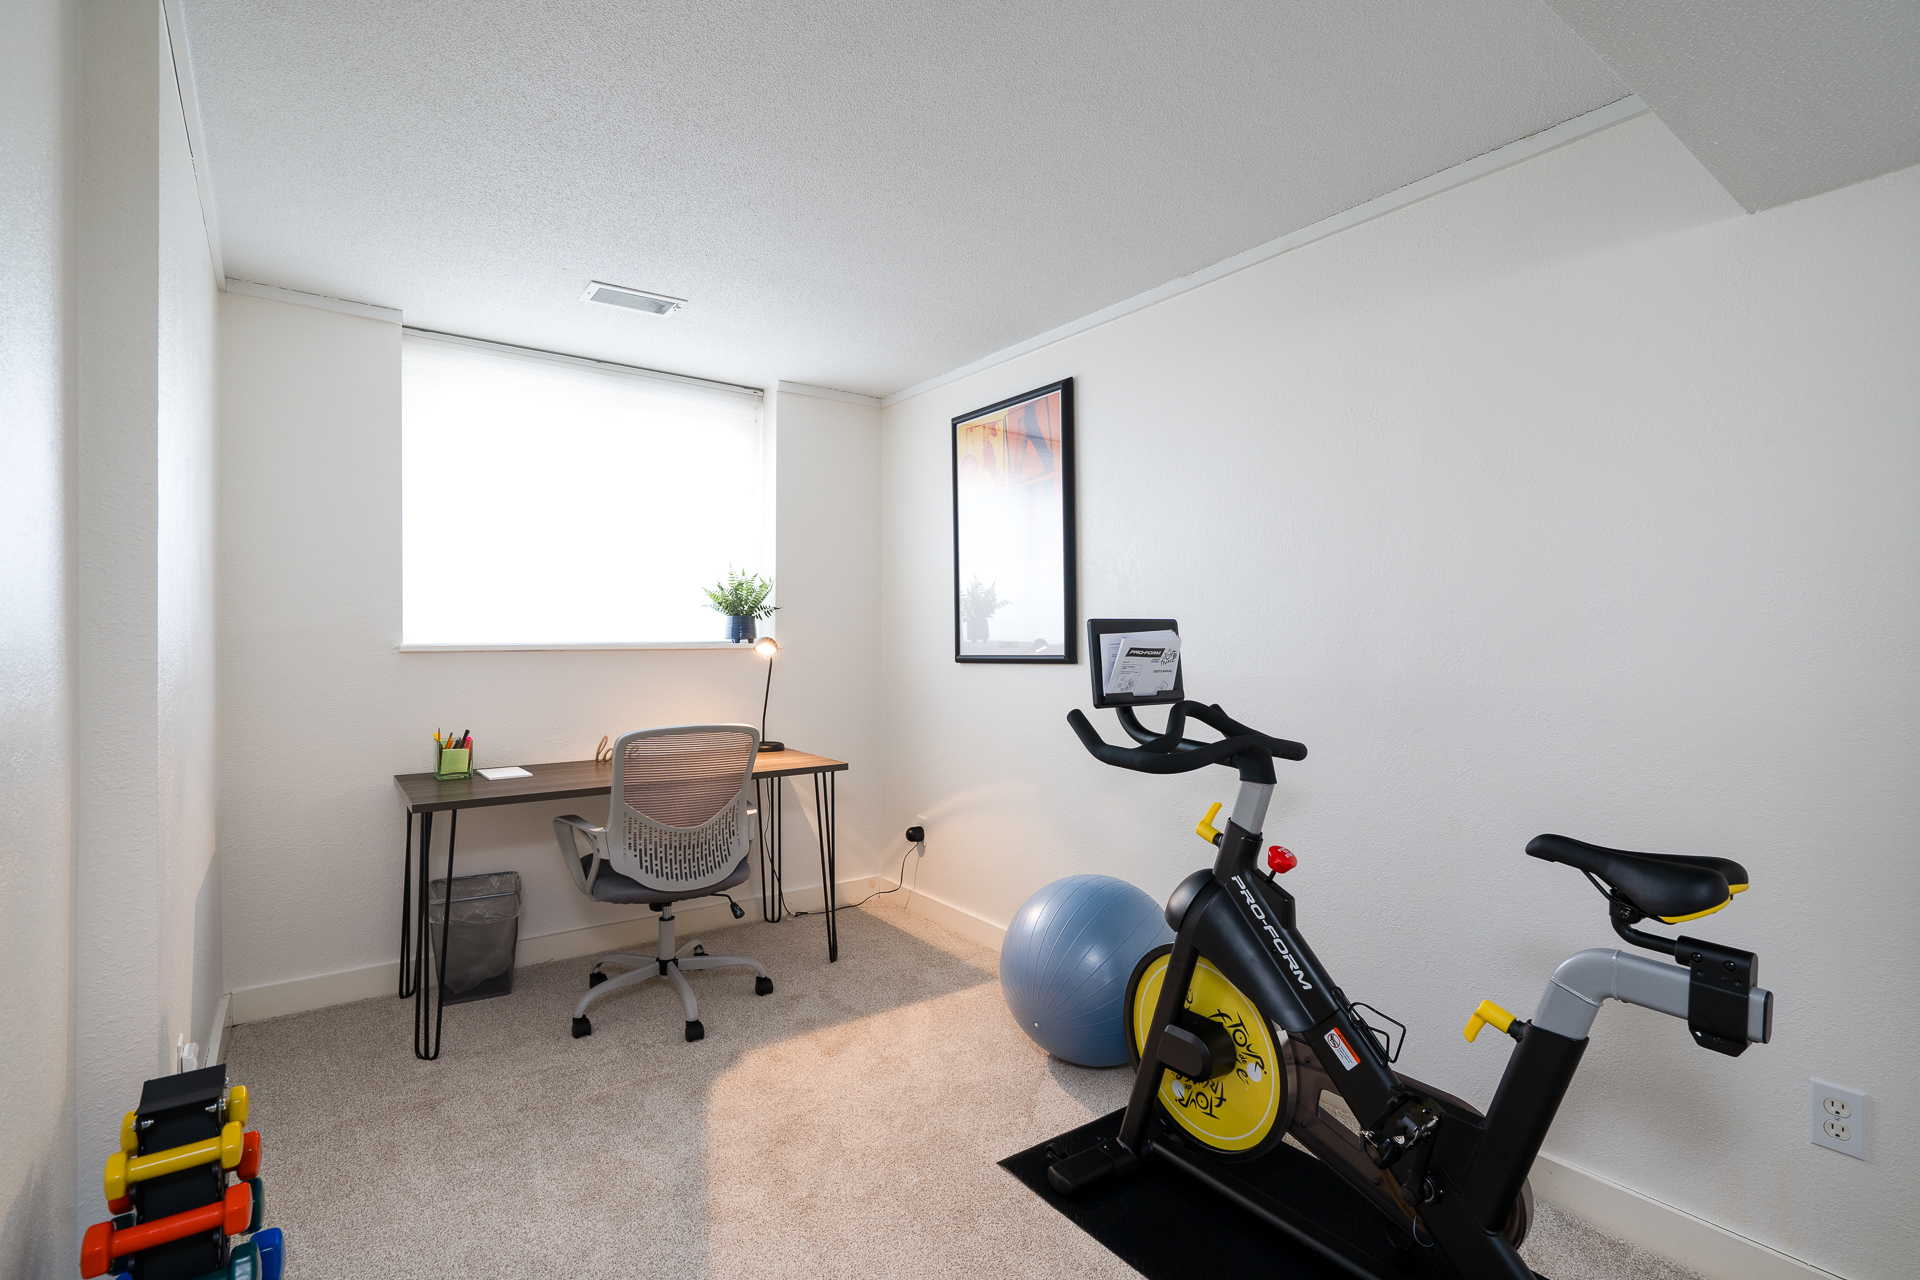 Work or work out in your home away from home!